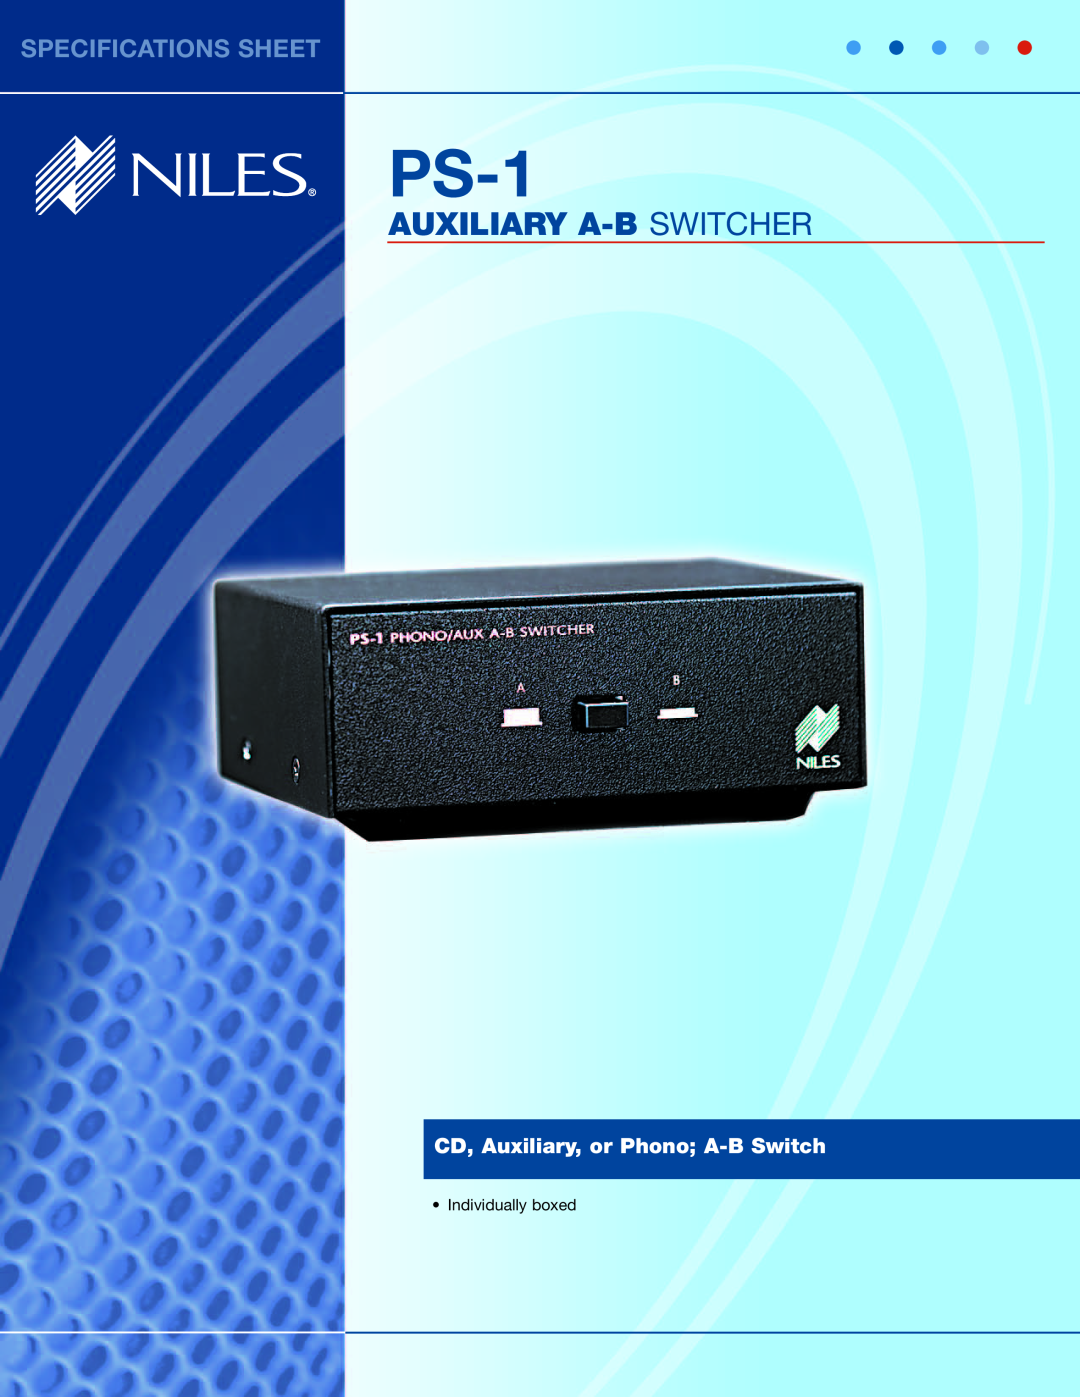 Niles Audio PS-1 specifications Individually boxed, Auxiliary A-B Switcher, Specifications Sheet 